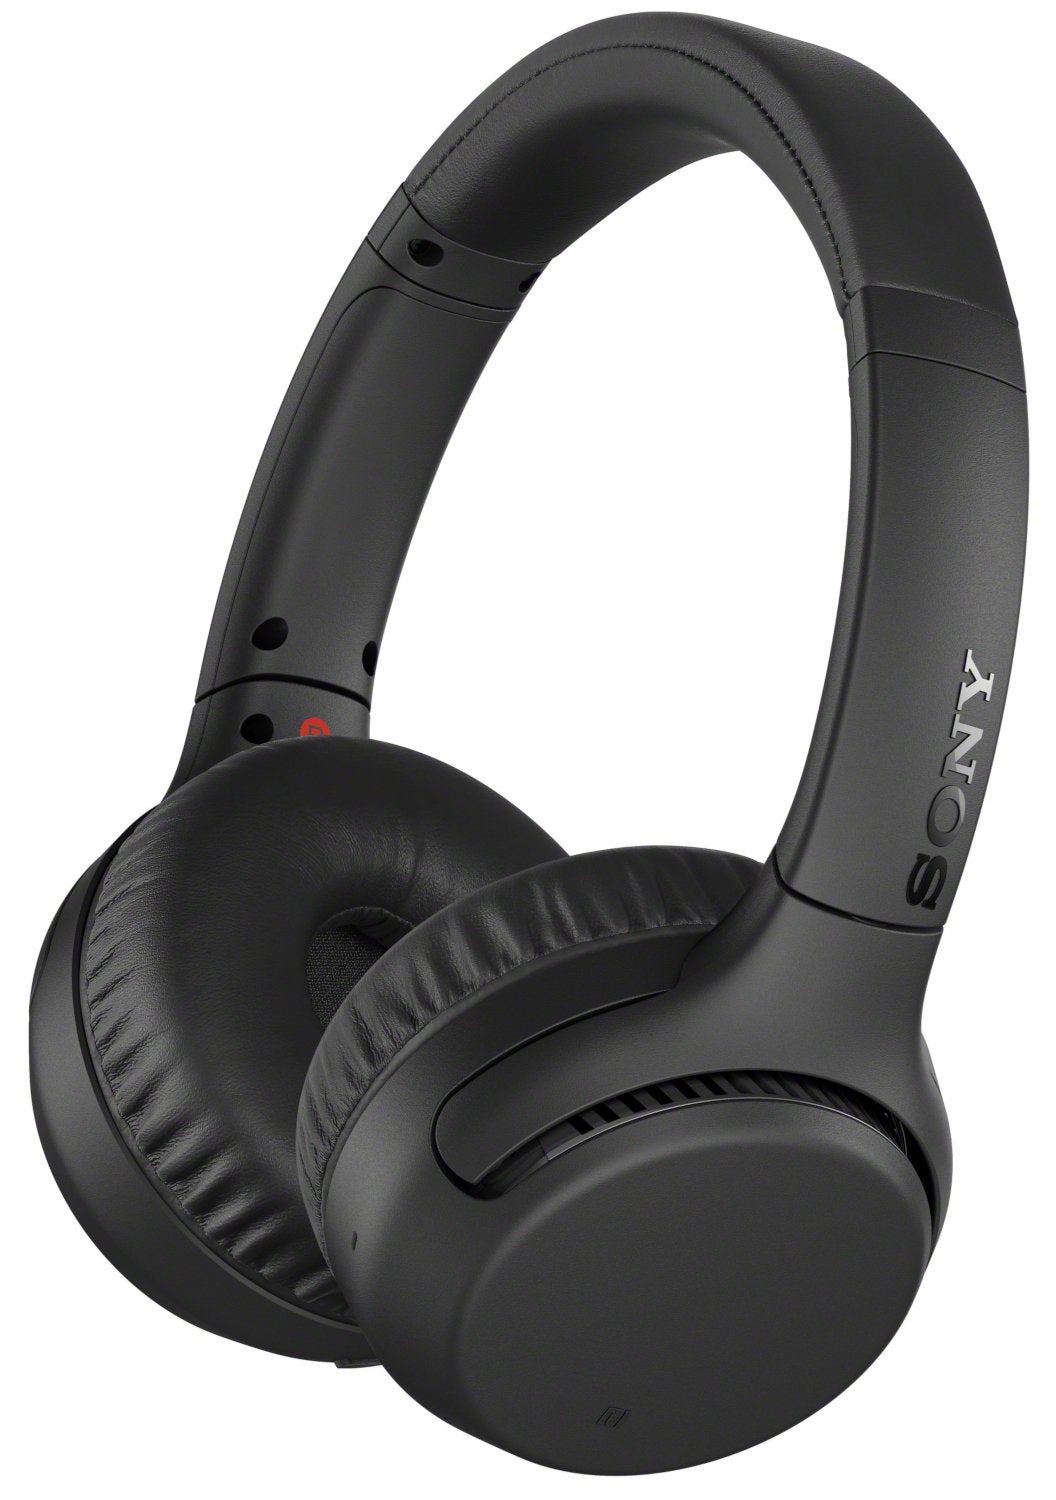 Sony announces new Extra Bass series headphones with Google Assistant